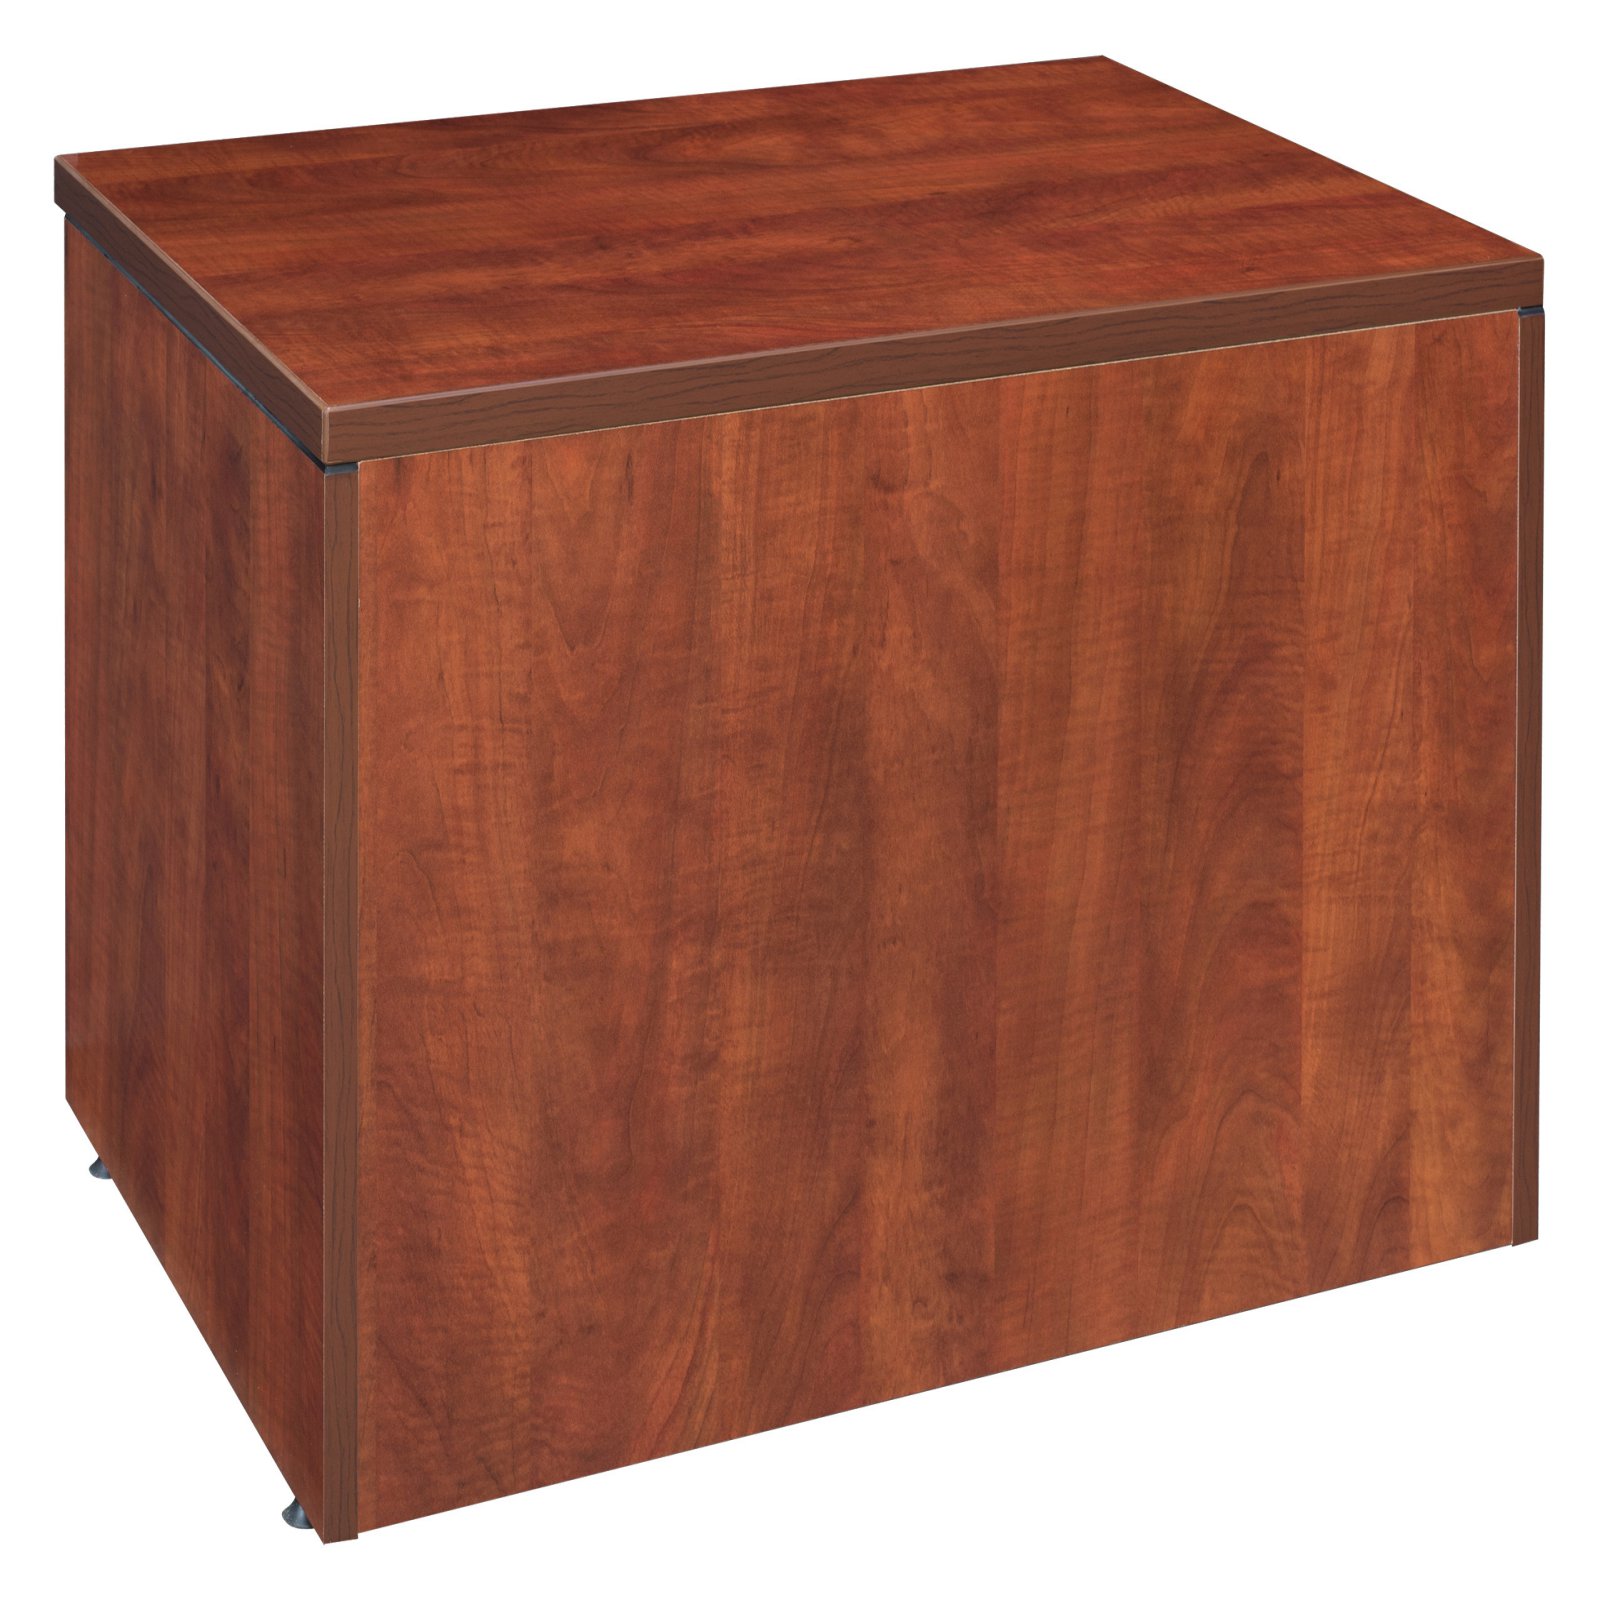 Regency Legacy 20 in. 2 Drawer Low Lateral File- Mahogany - image 3 of 7